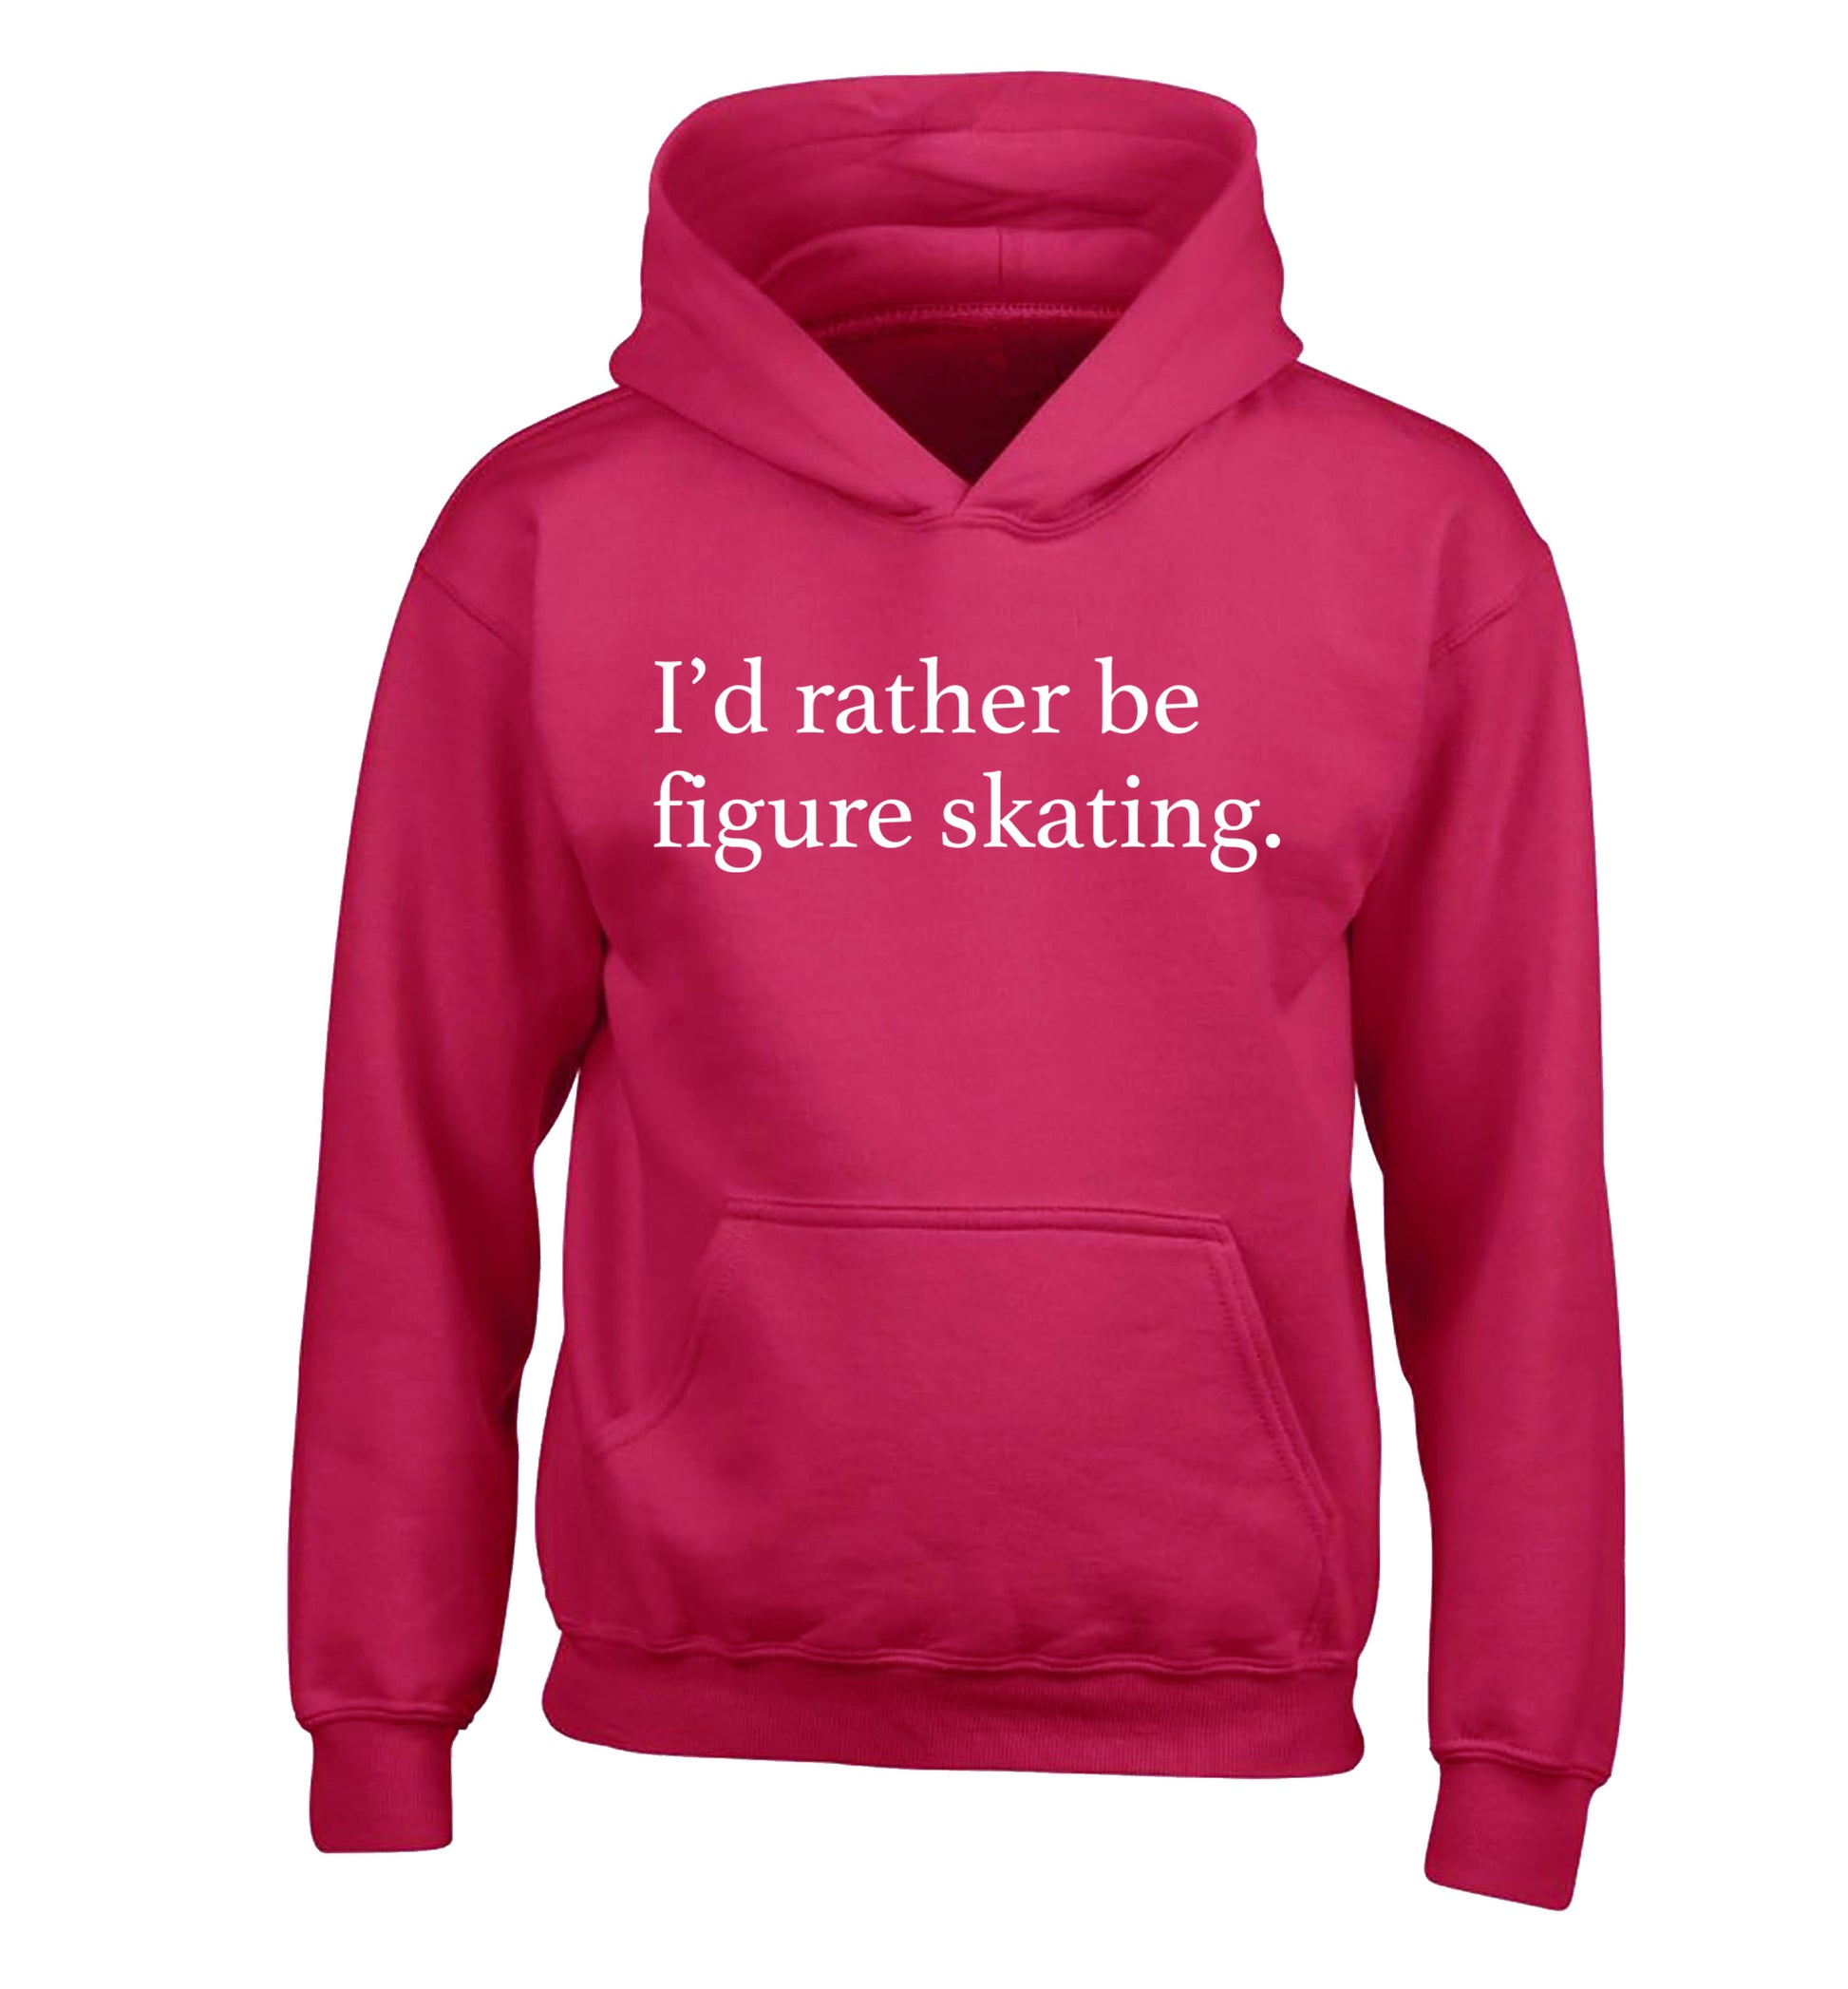 I'd rather be figure skating children's pink hoodie 12-14 Years